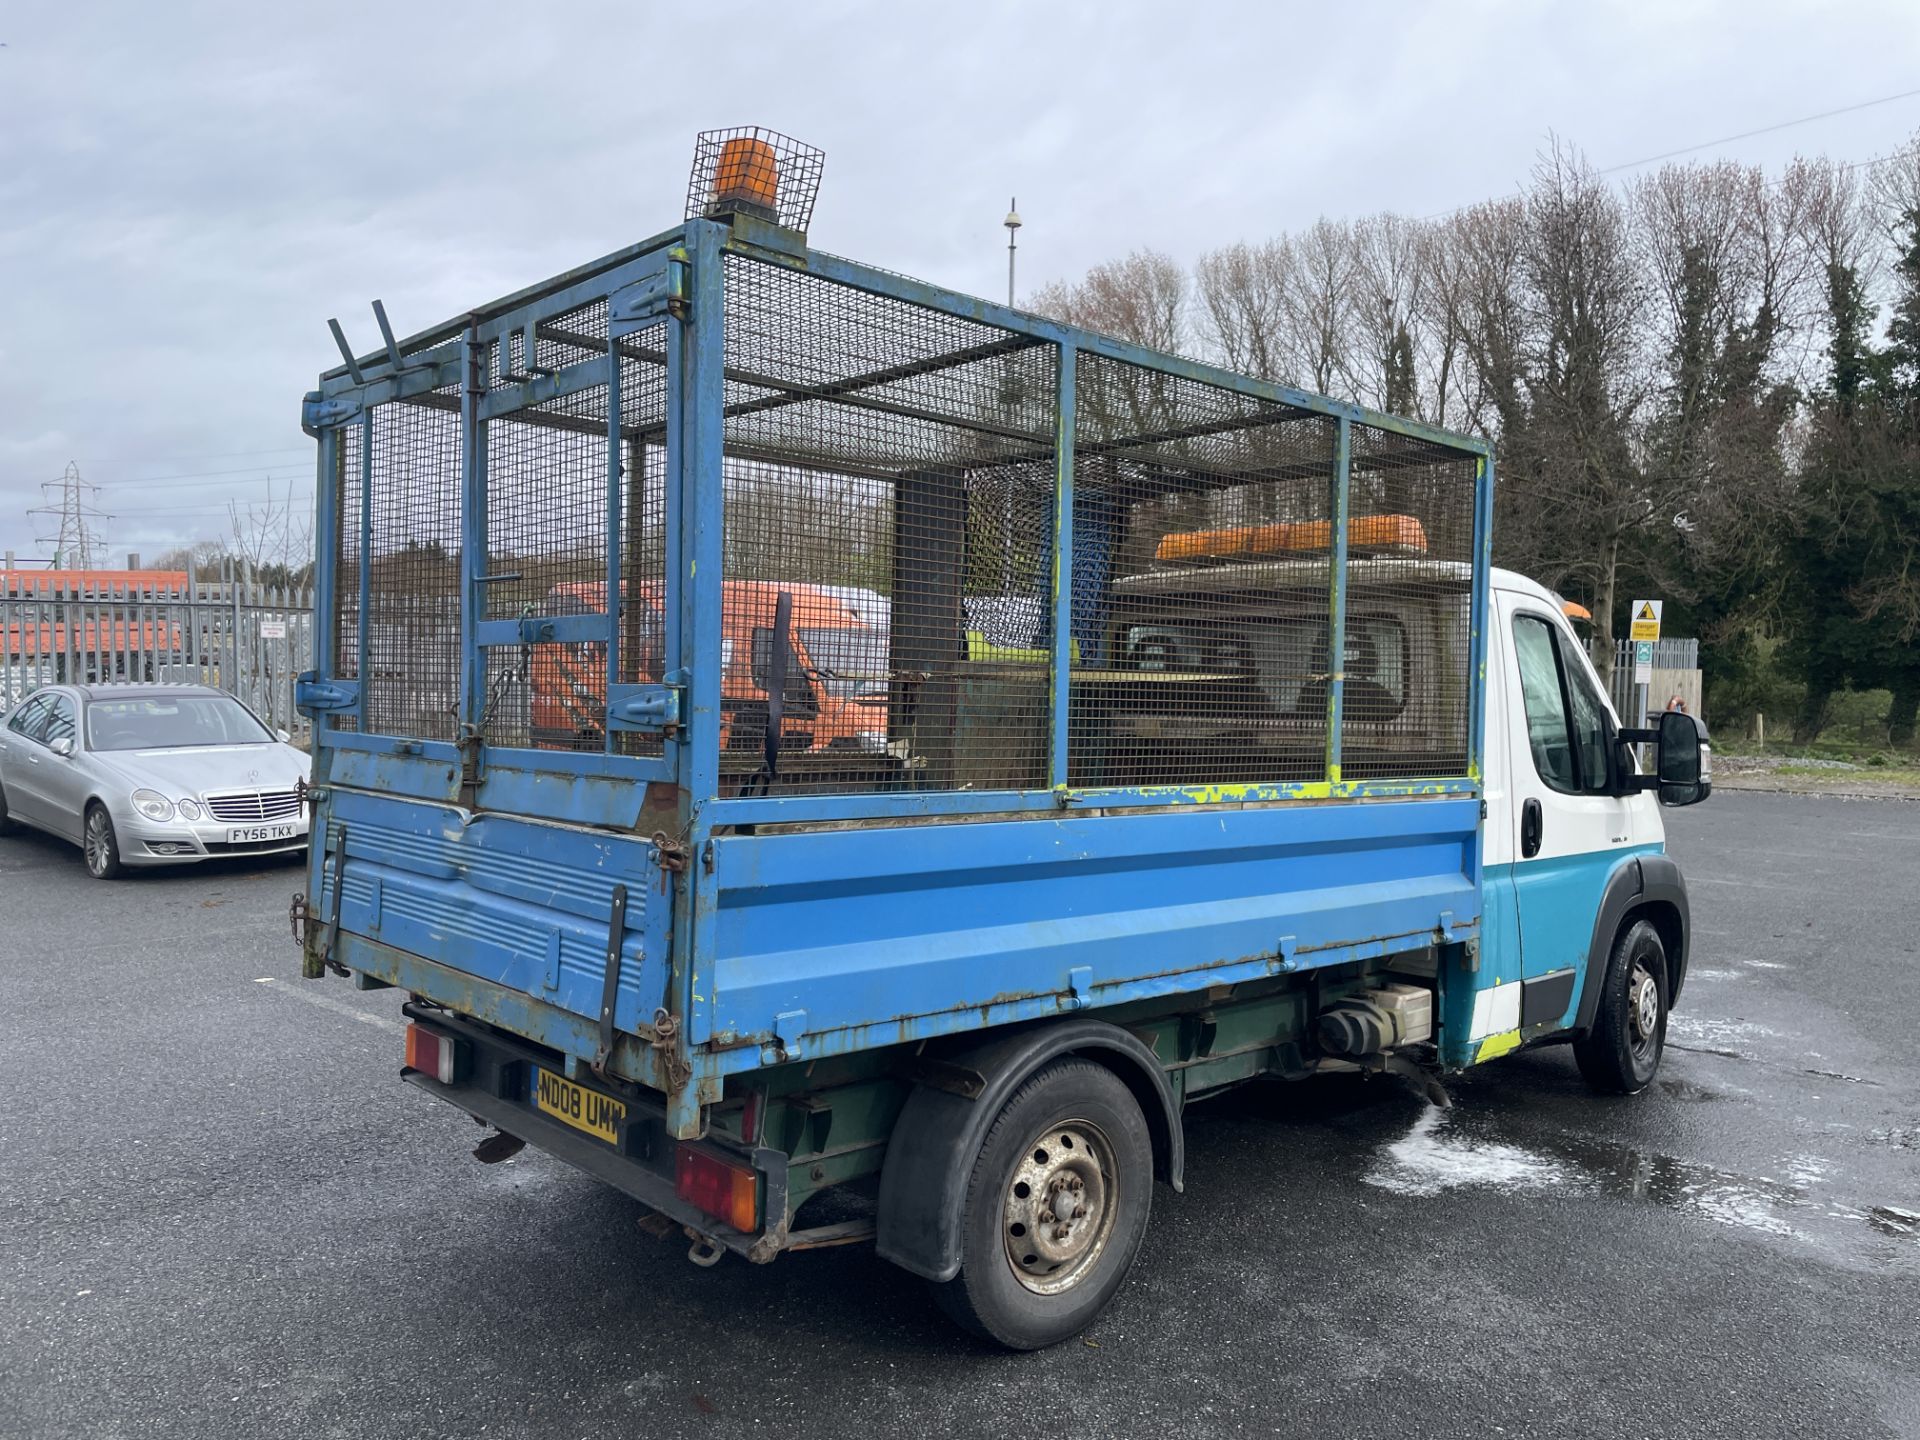 Citroen Relay Caged Tipper with rare Wheelie Bin Lift (39568) - Image 3 of 19